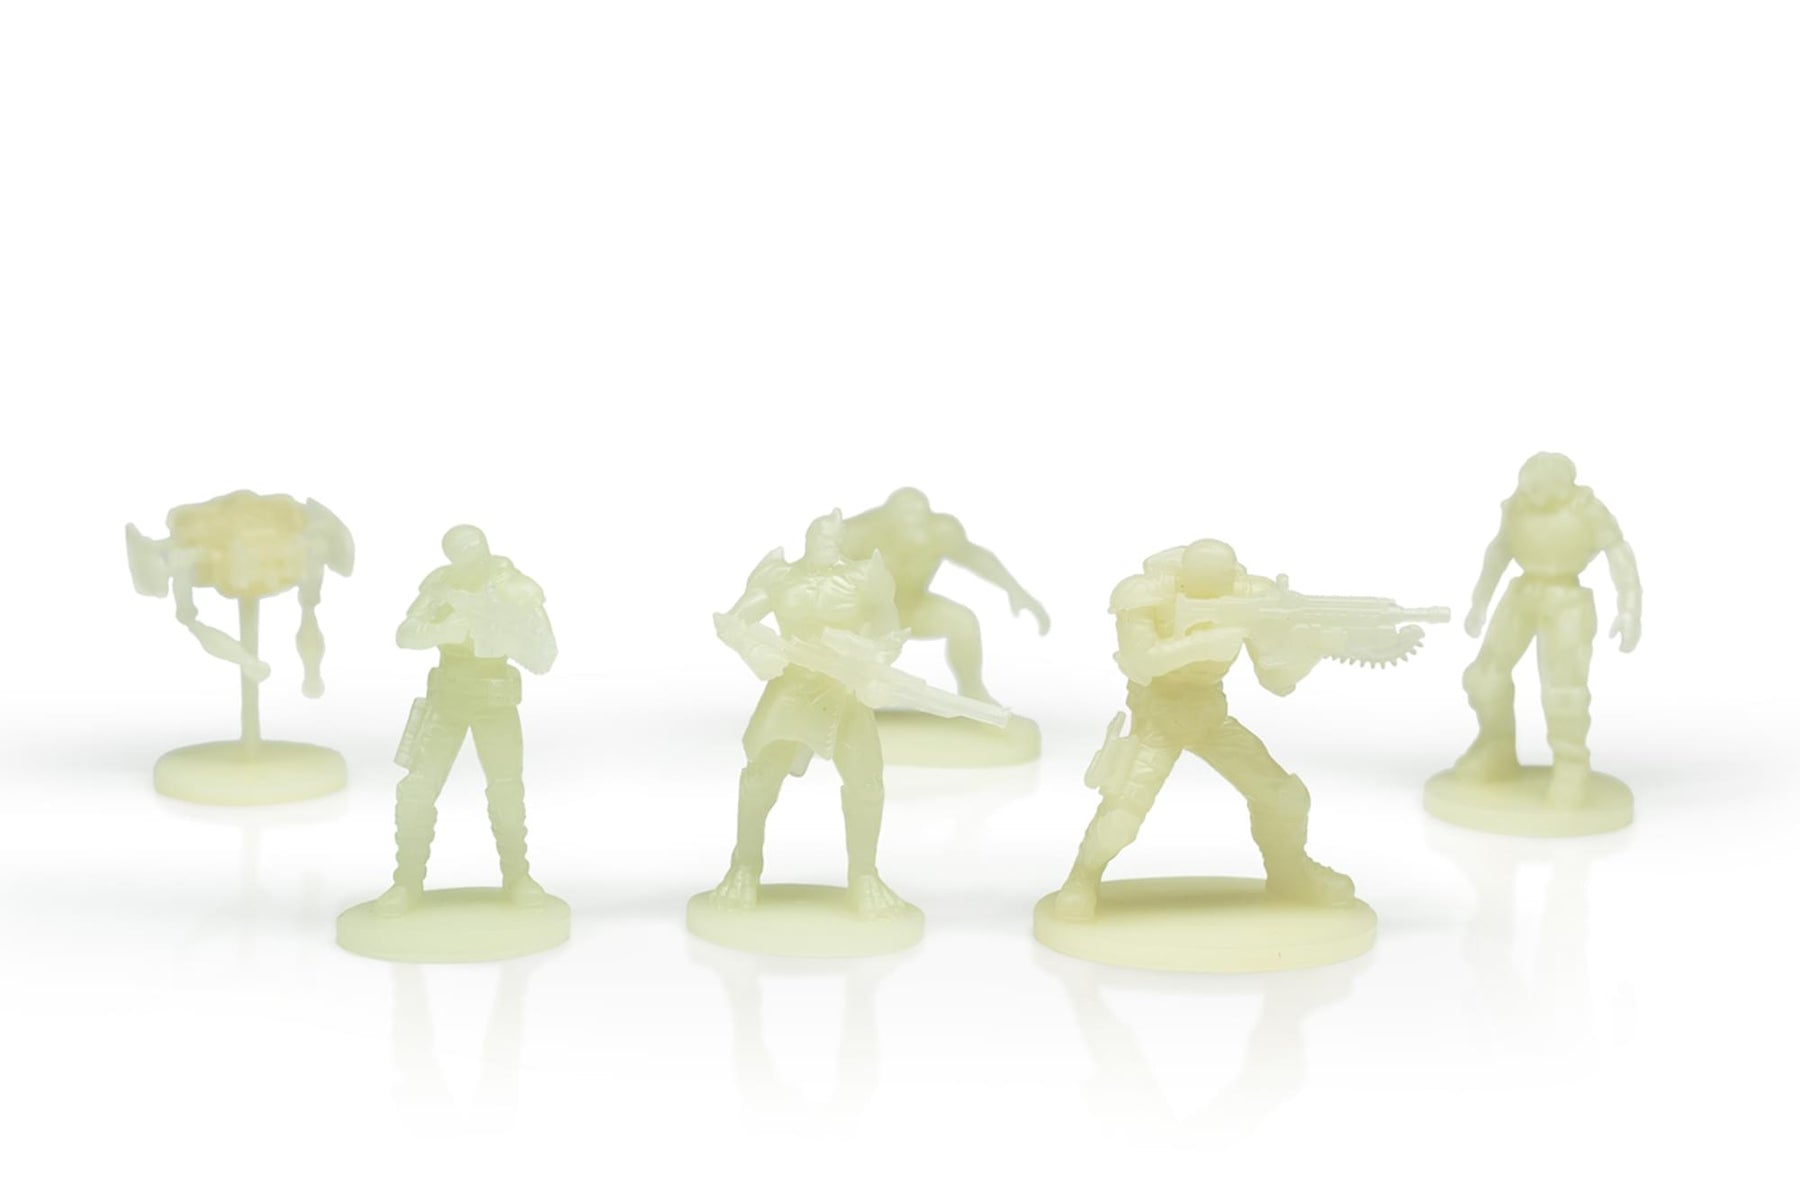 Gears of War Nanoforce Army Builder Figure Collection - 6 Pack - Glow In The Dark